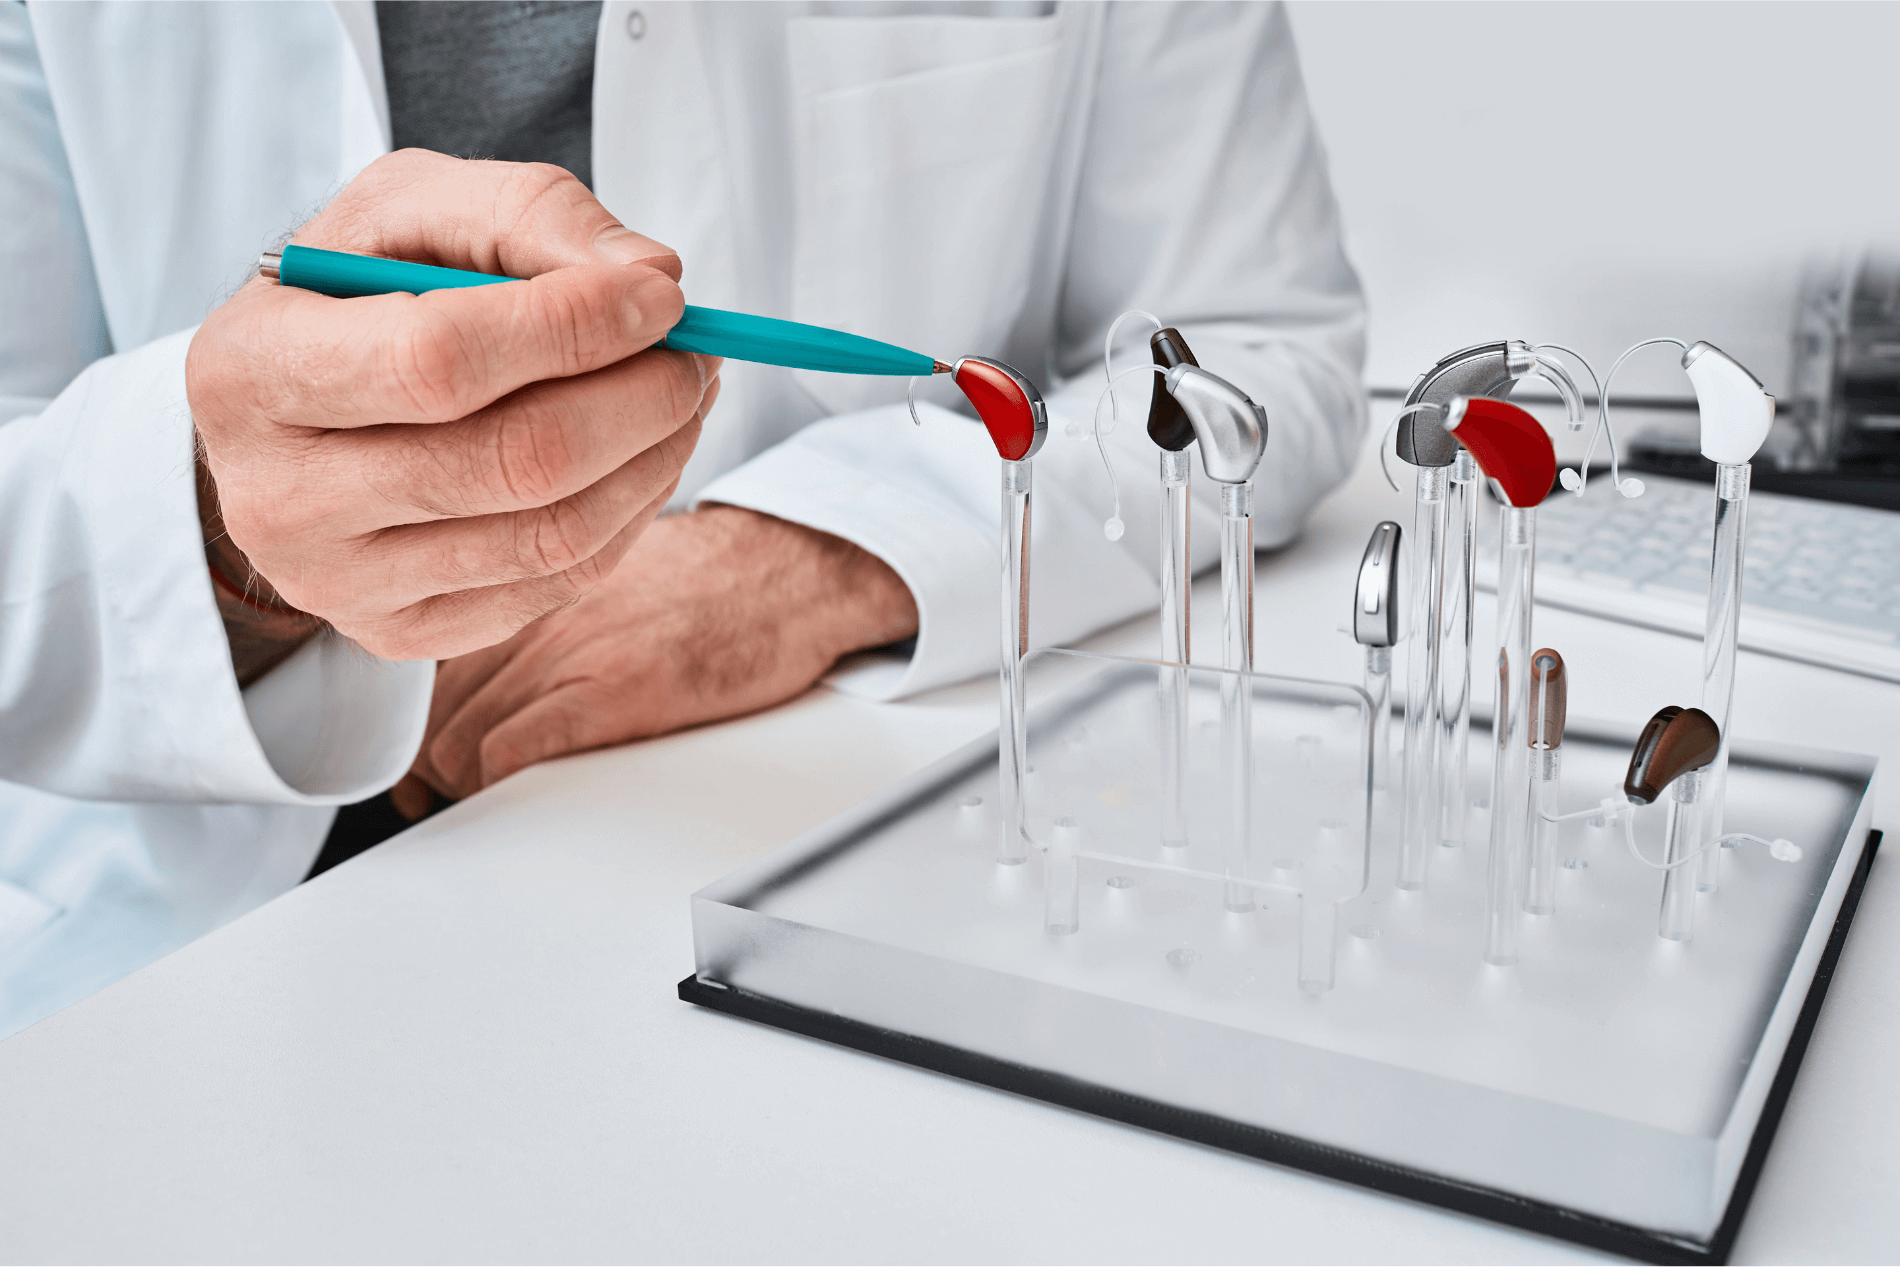 Accessorizing and Customizing Your Hearing Aids